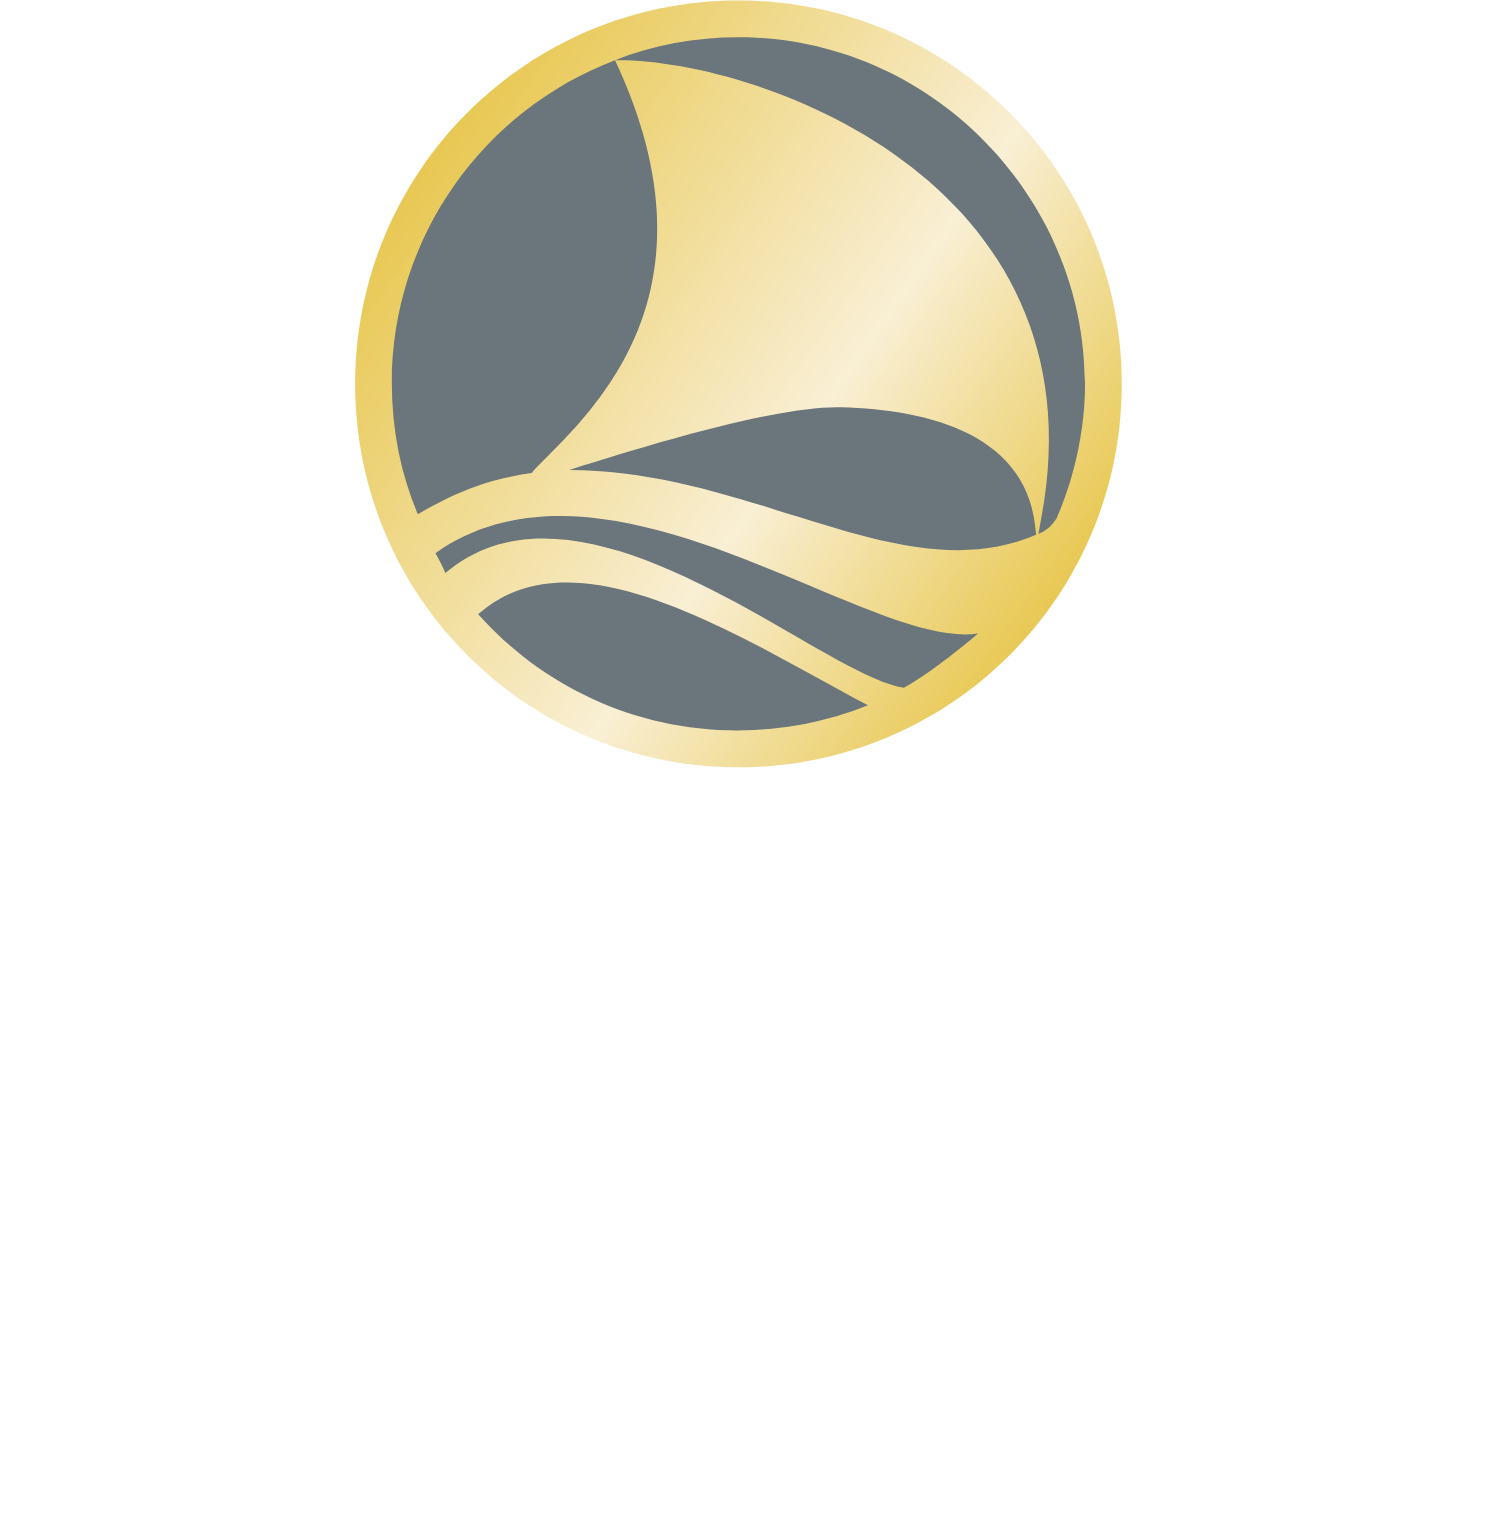 Gulf Hotels Group logo large for dark backgrounds (transparent PNG)